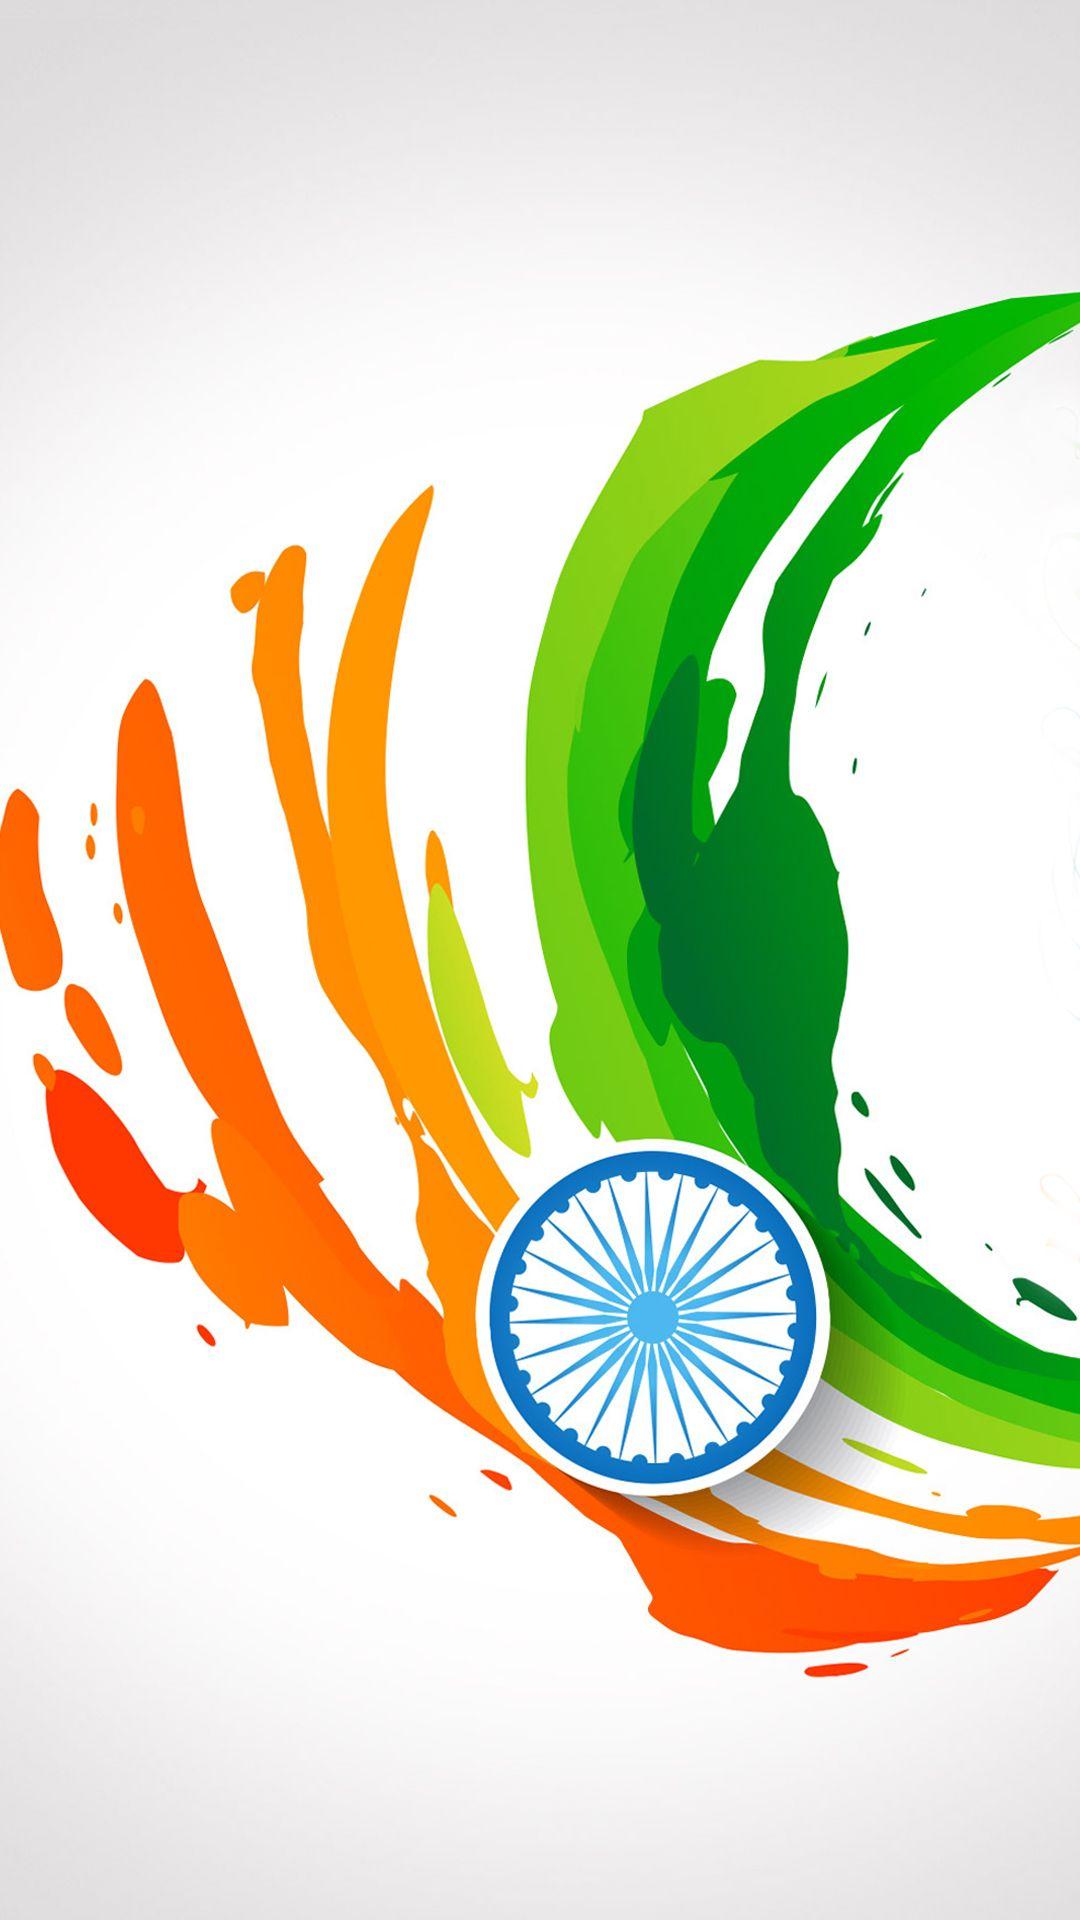 Download Indian flag Independence day iphone 7 mobile image. iPhone